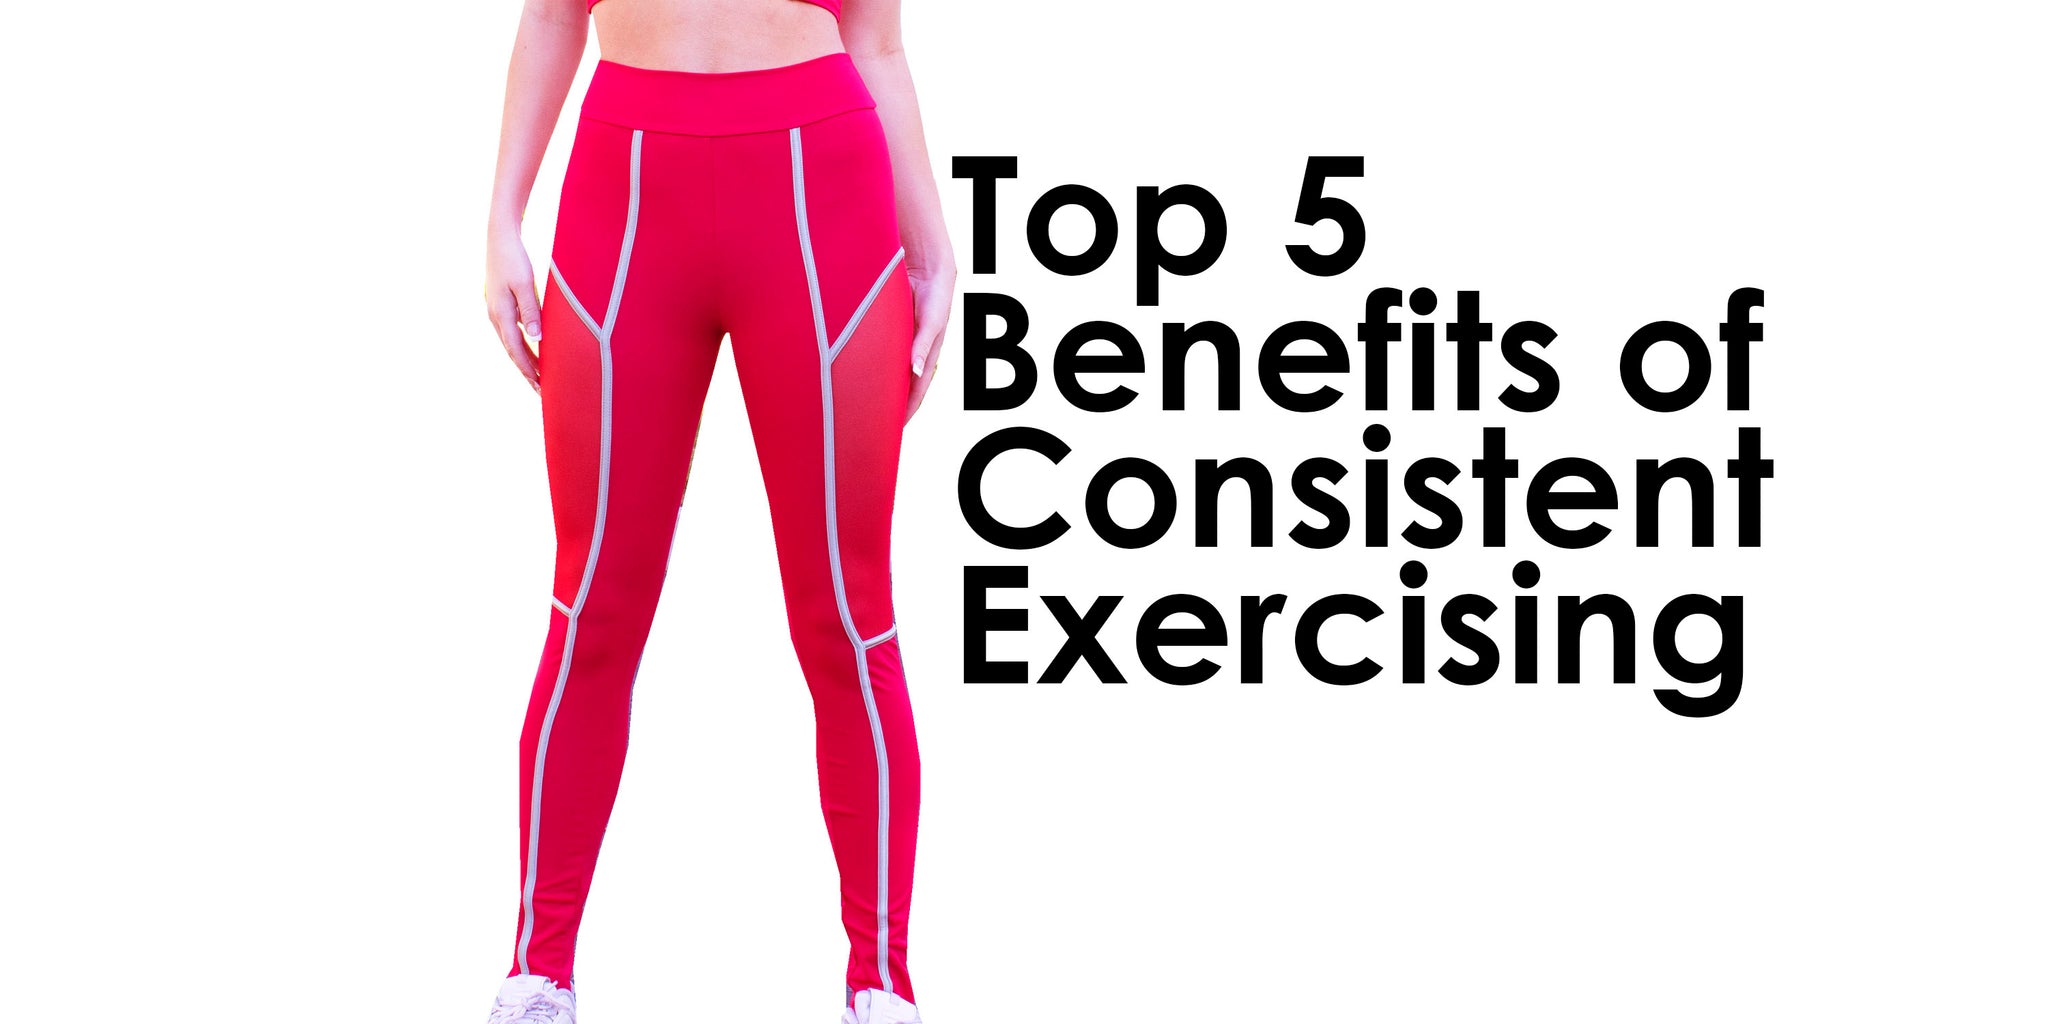 Top 5 Benefits of Consistent Exercising